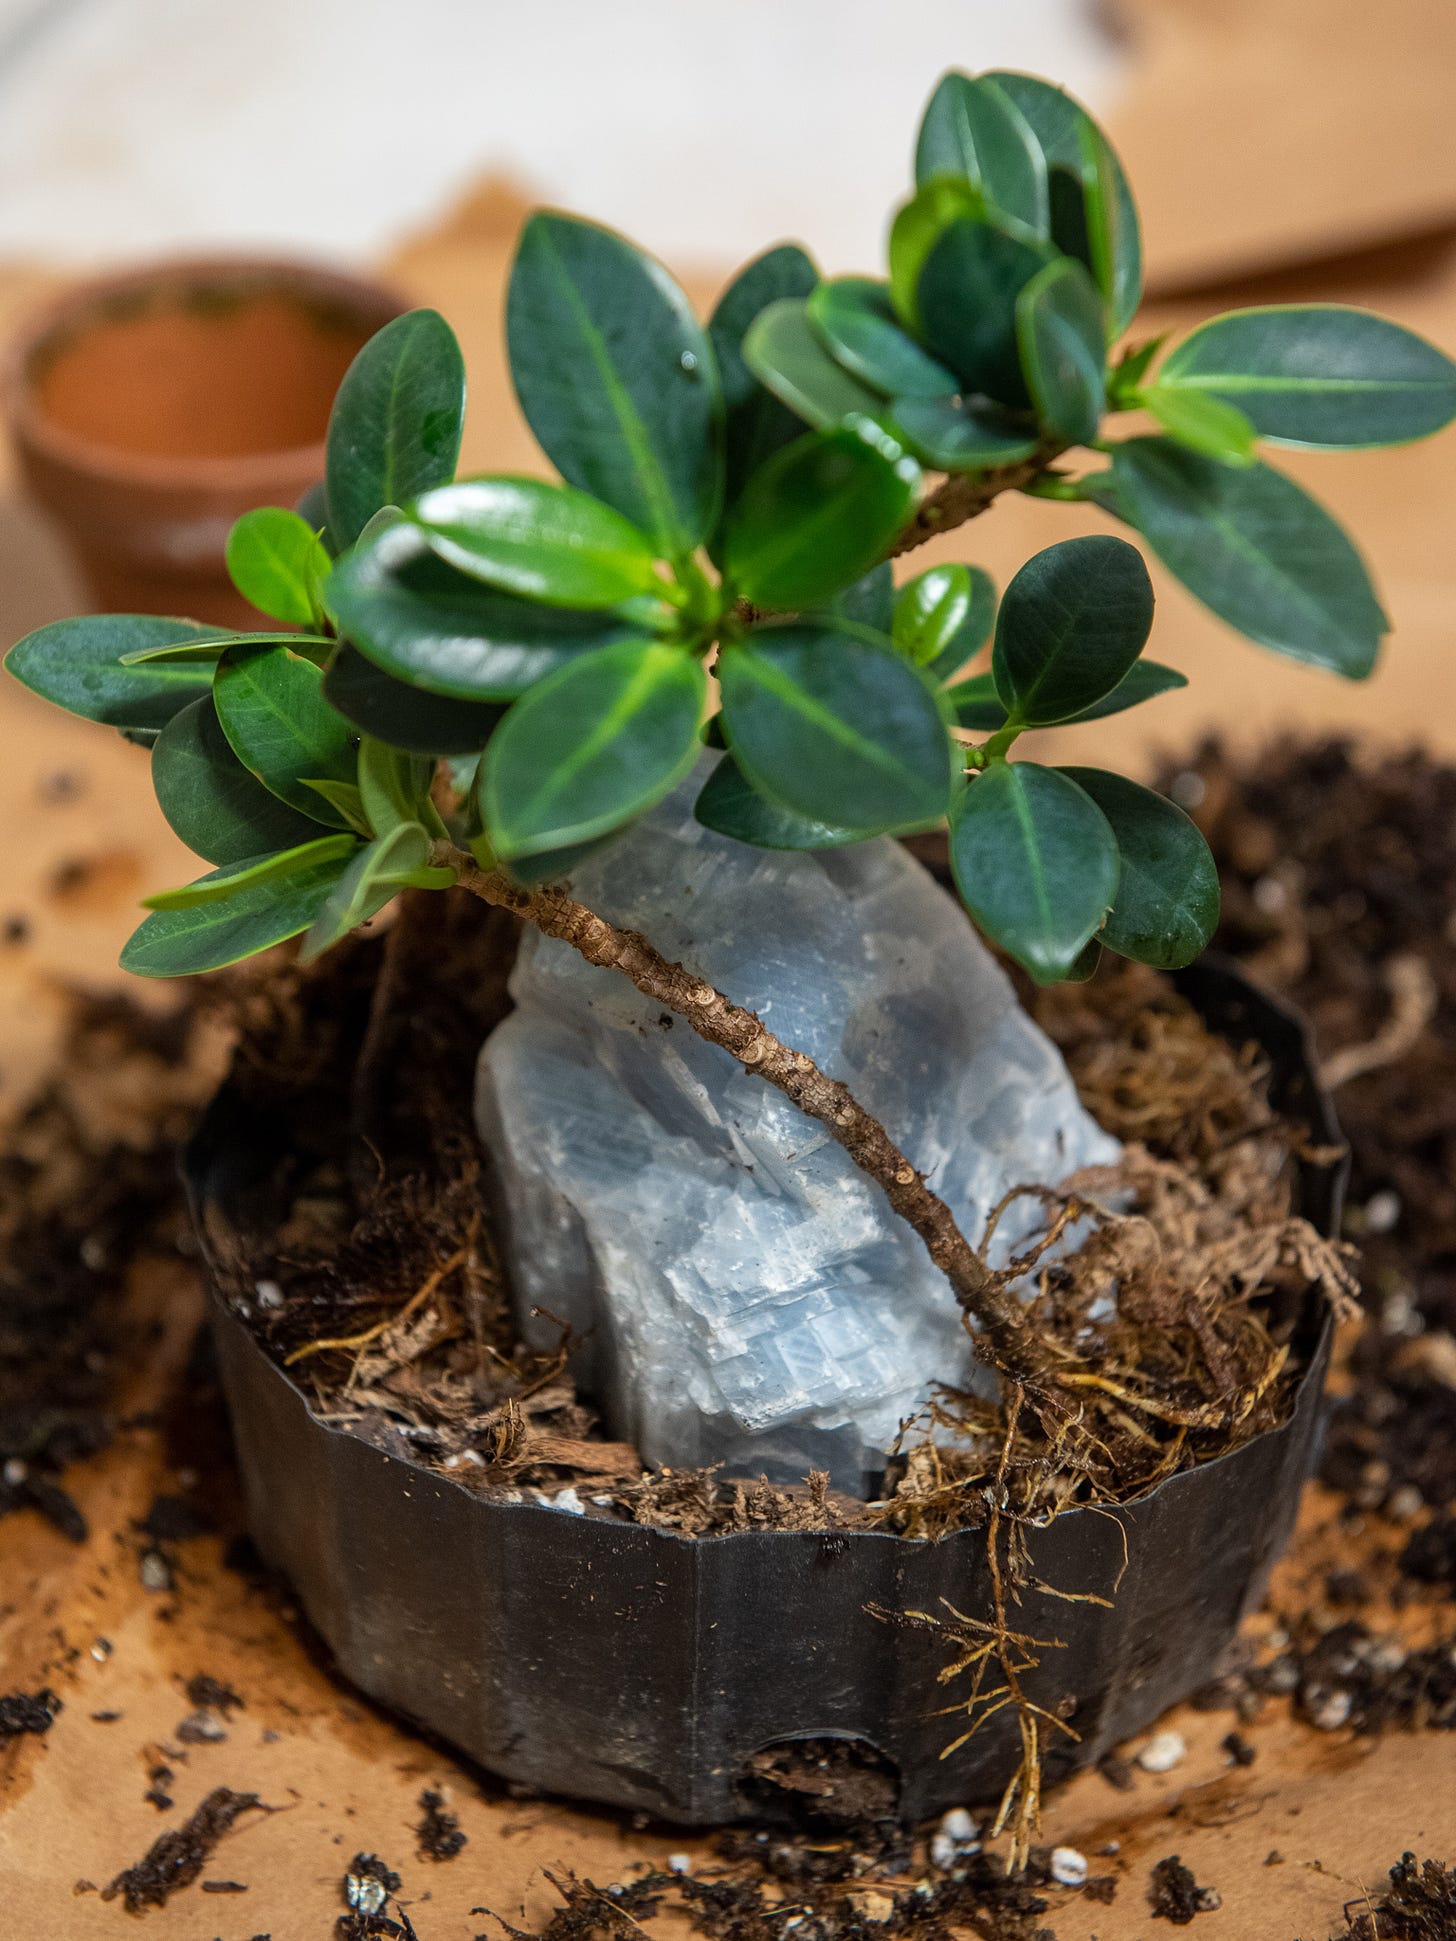 ID: The three cuttings placed loosely against the crystal.